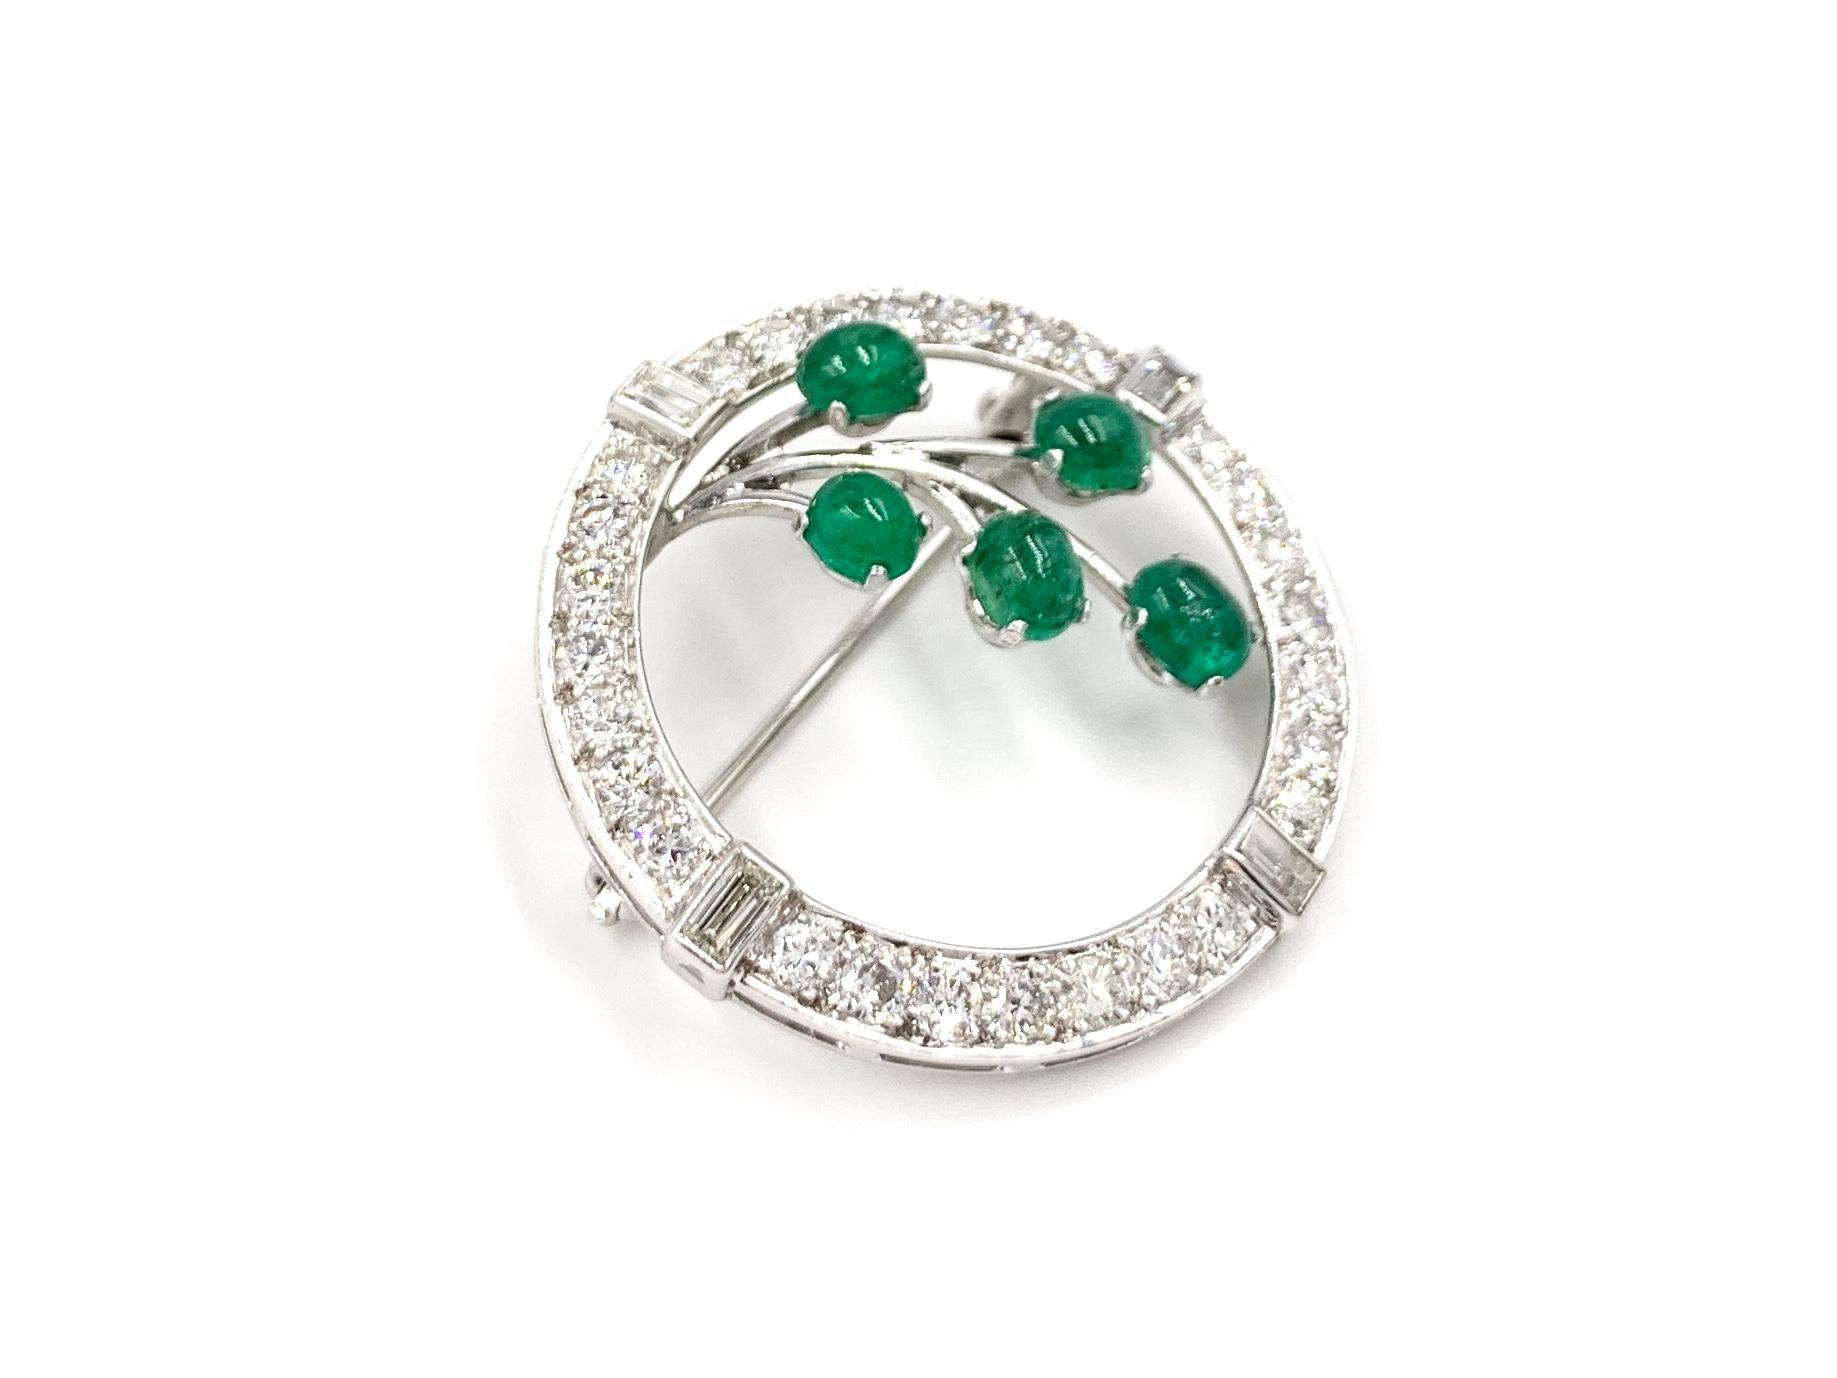 An elegant and wearable 14k white gold diamond and emerald vintage brooch with a beautiful garland branch motif. Circle brooch is composed of approximately 1.25 carats of white round brilliant and baguette cut diamonds at approximately G color, VS2